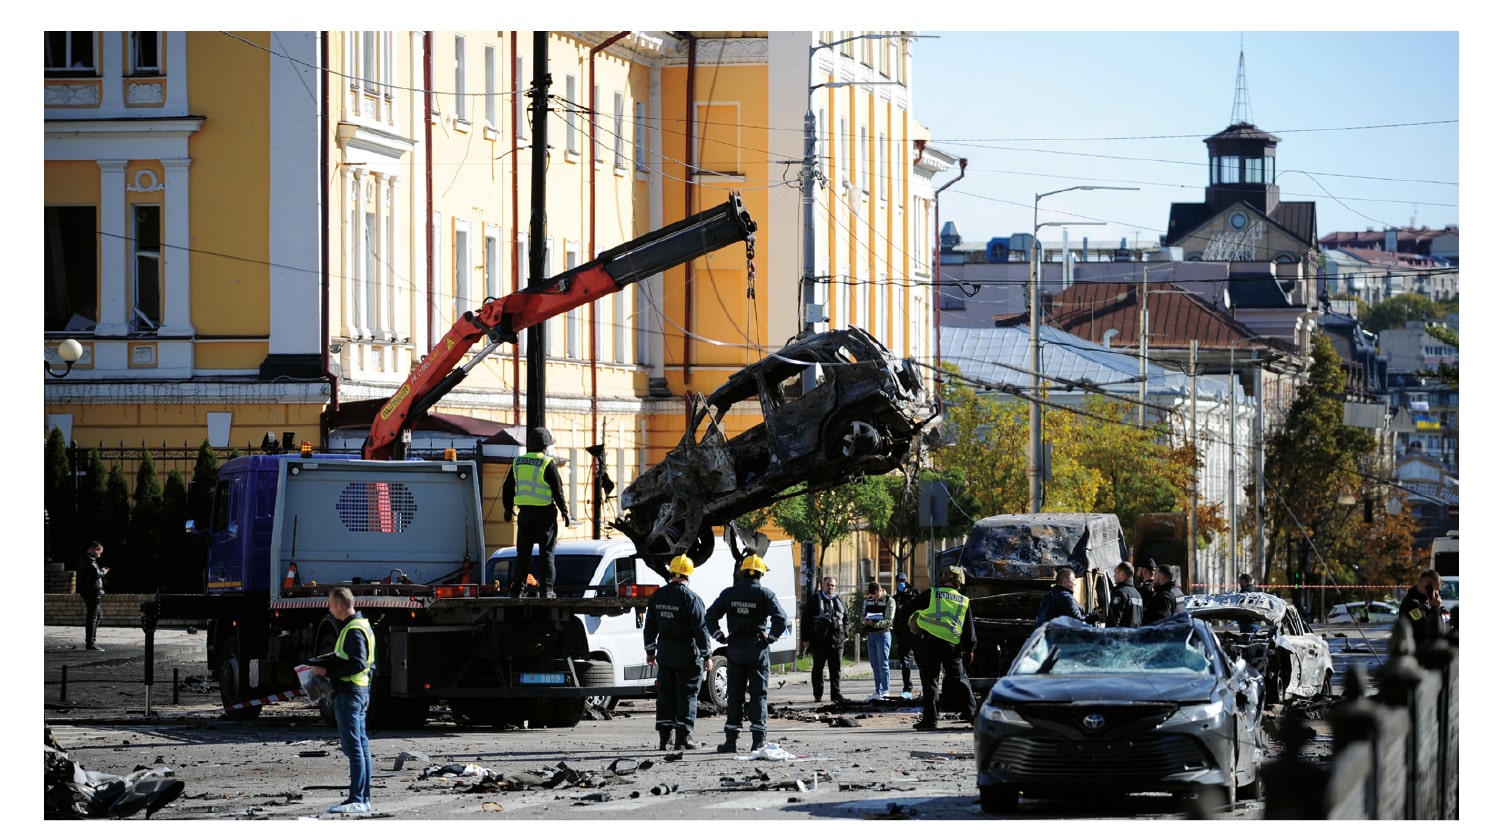 The effects of a missile strike on a street in Kyiv. Damaged cars line the street while a crane uplifts a car and a team of emergency service workers supervise